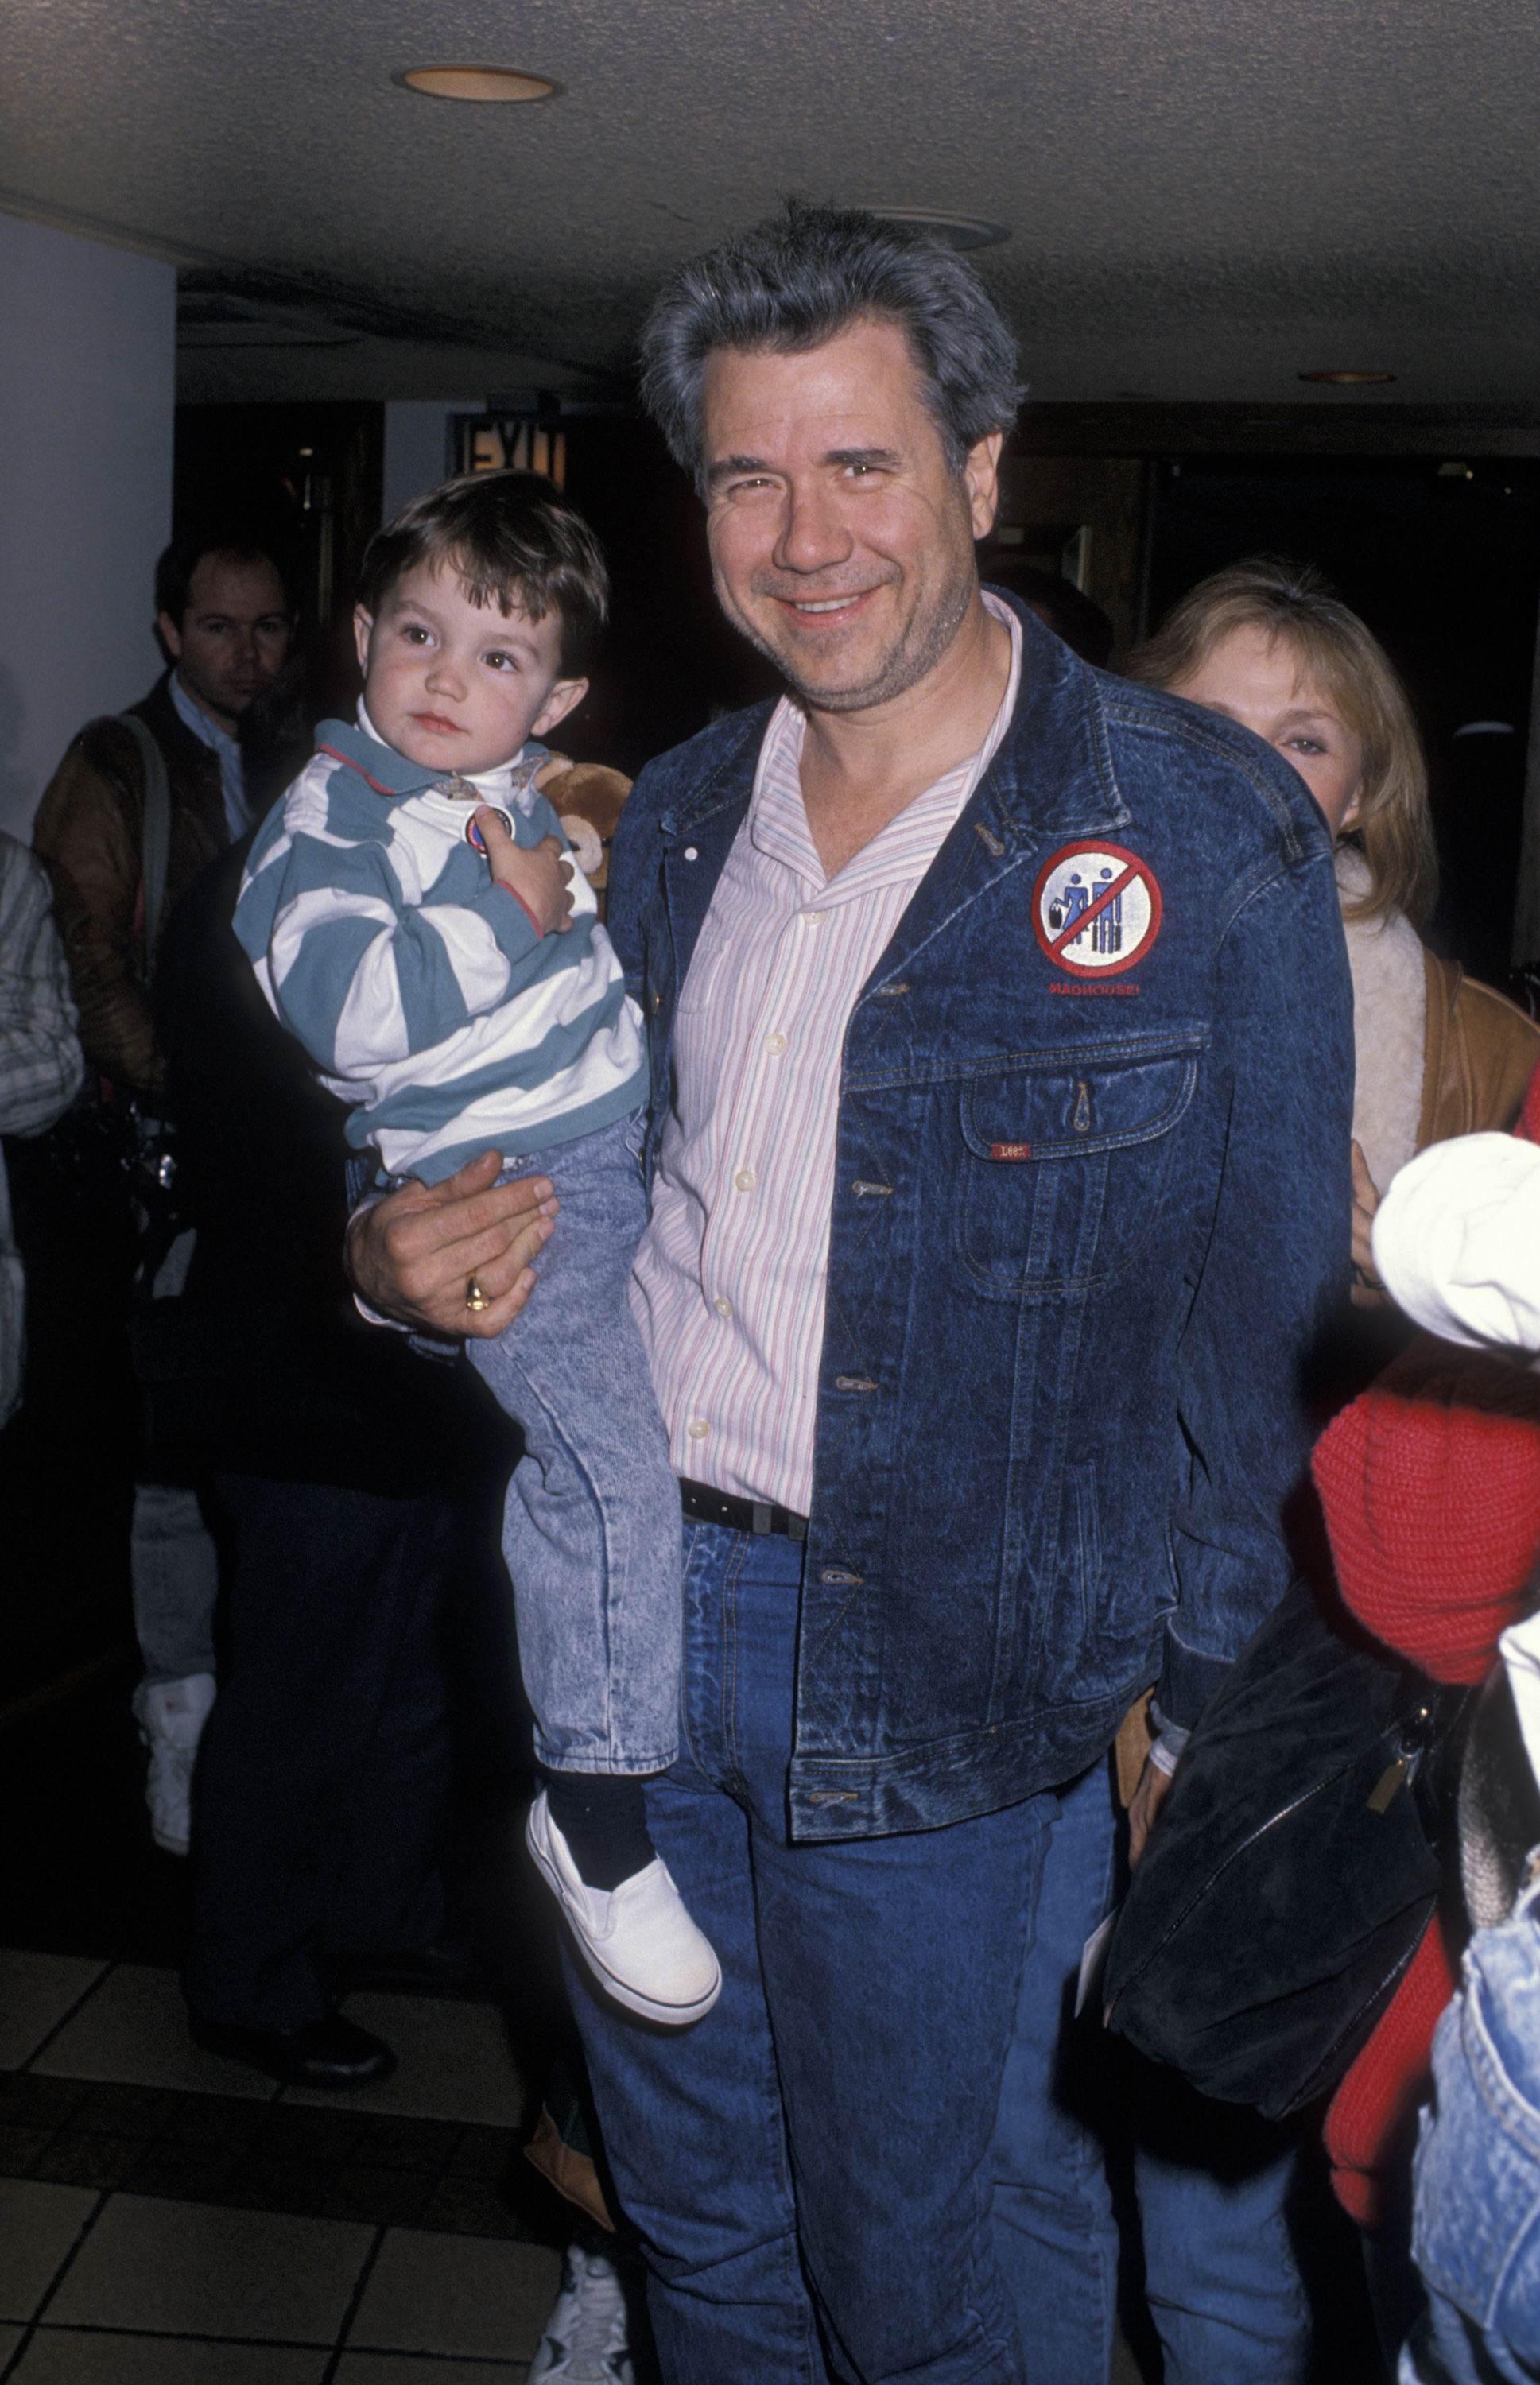 John Larrouquette and his son, Jonathan, at the opening of the Moscow Circus in 1990. | Source: Getty Images